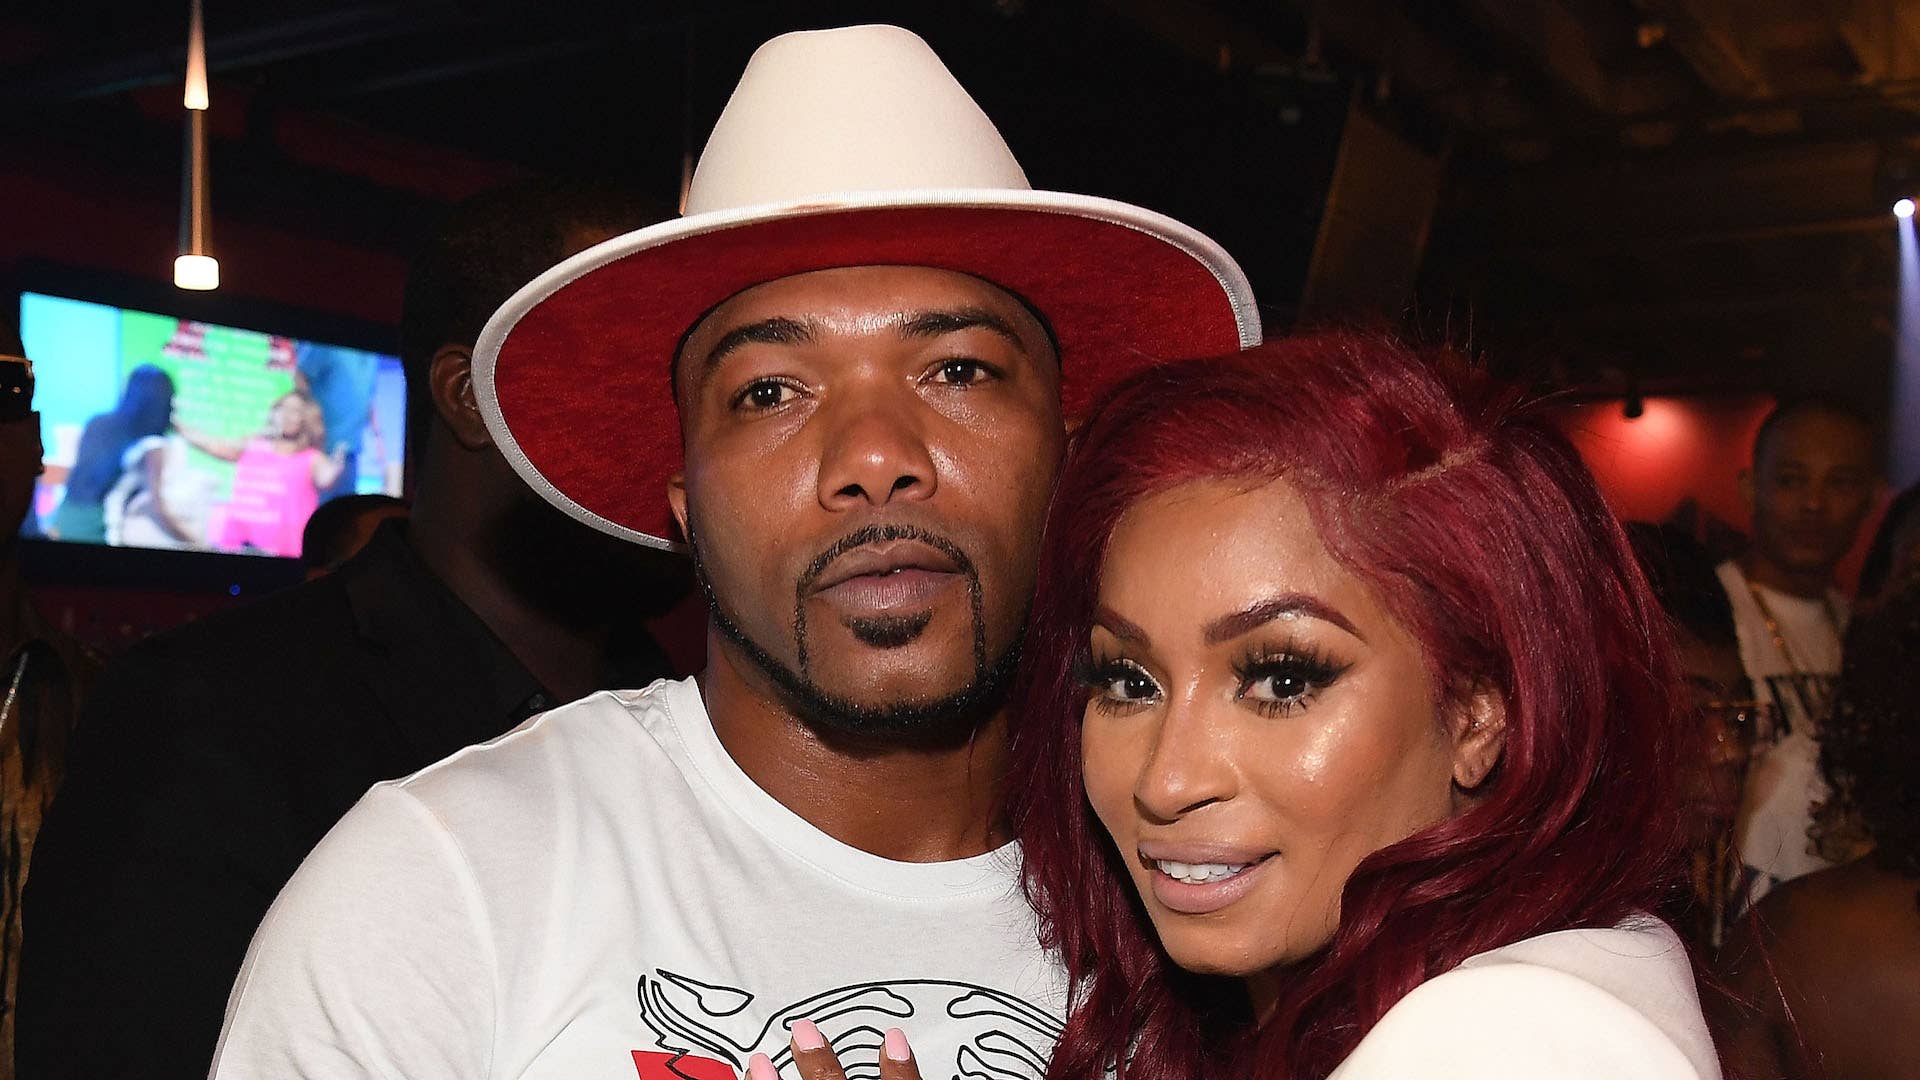 Maurice "Mo" Fayne and Karlie Redd attend "Ferrari Karlie" Single Release Party